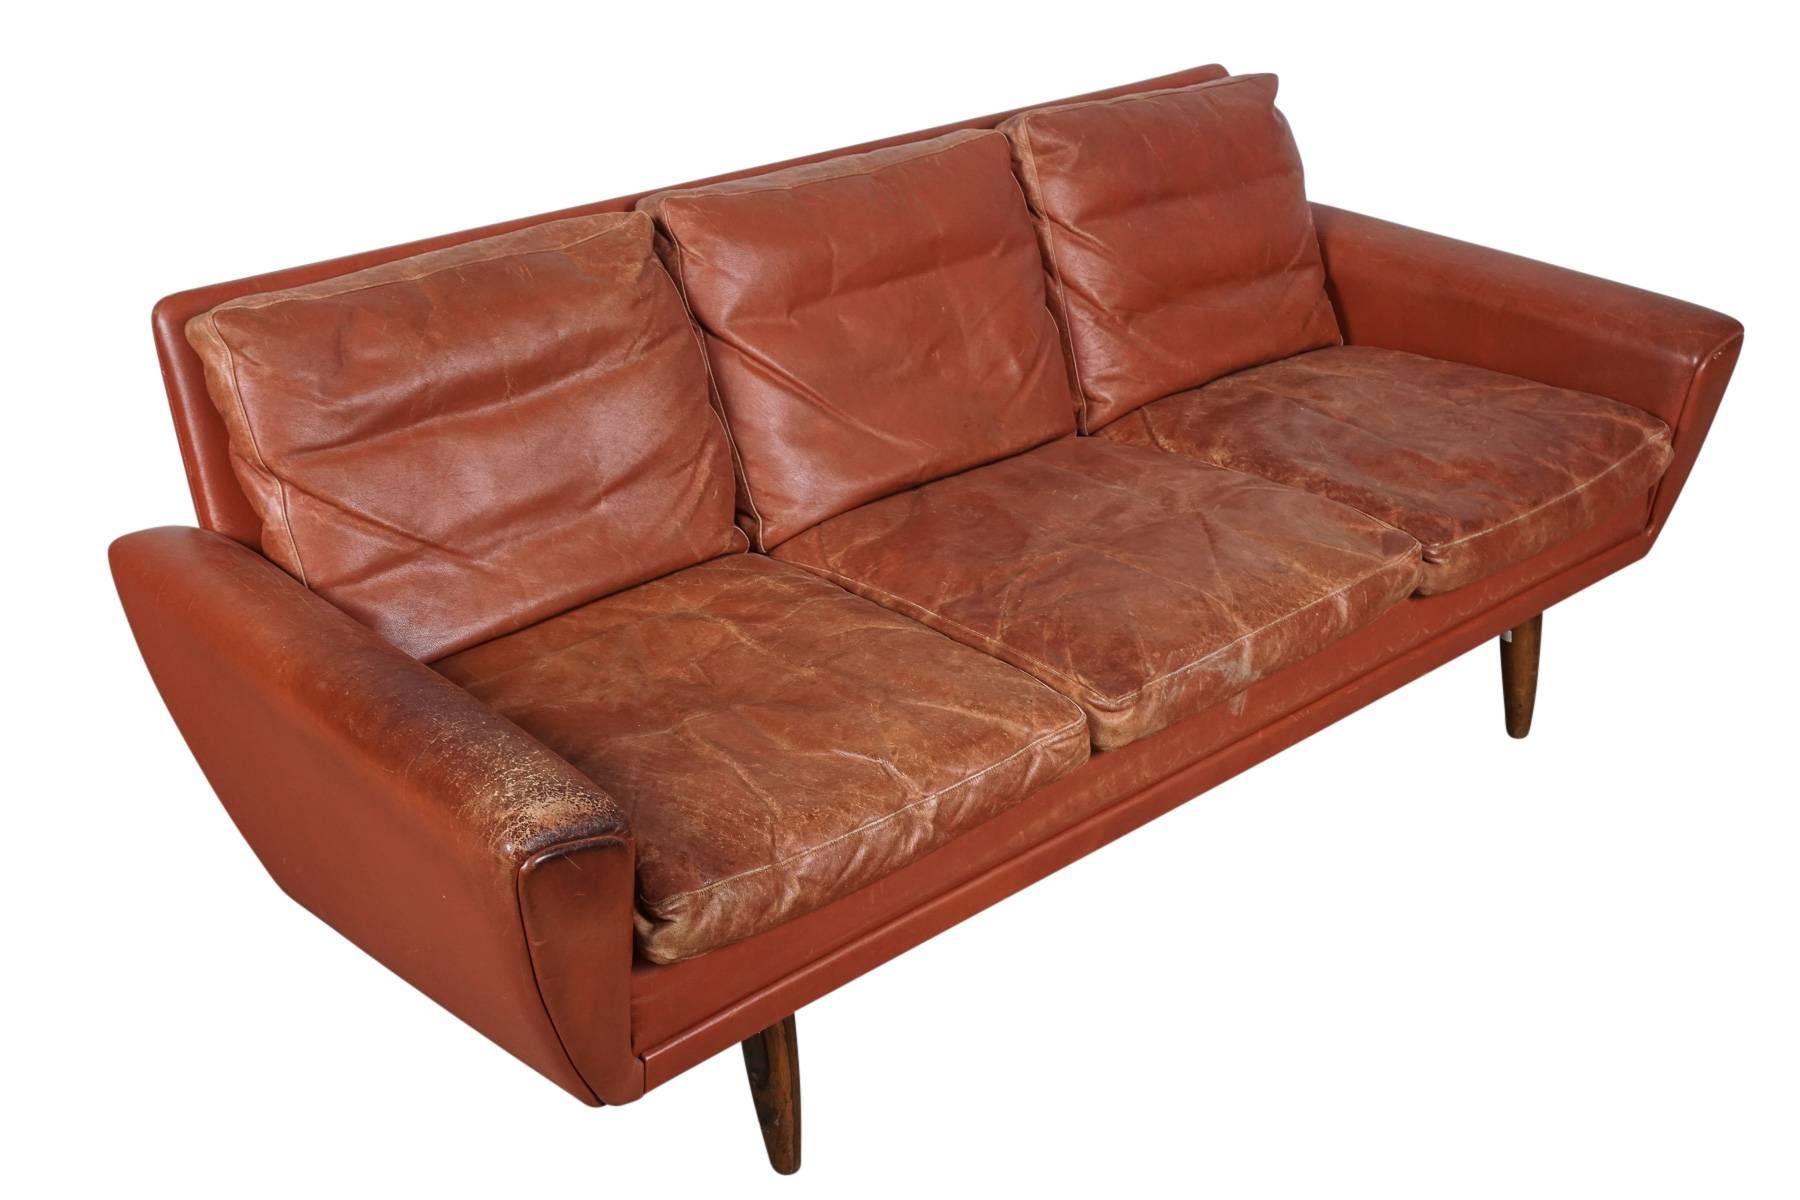 Danish Mid-Century sofa in red leather with nice wear and patina. Designed by Georg Thams, Denmark. Down filled cushions and tapered rosewood legs.